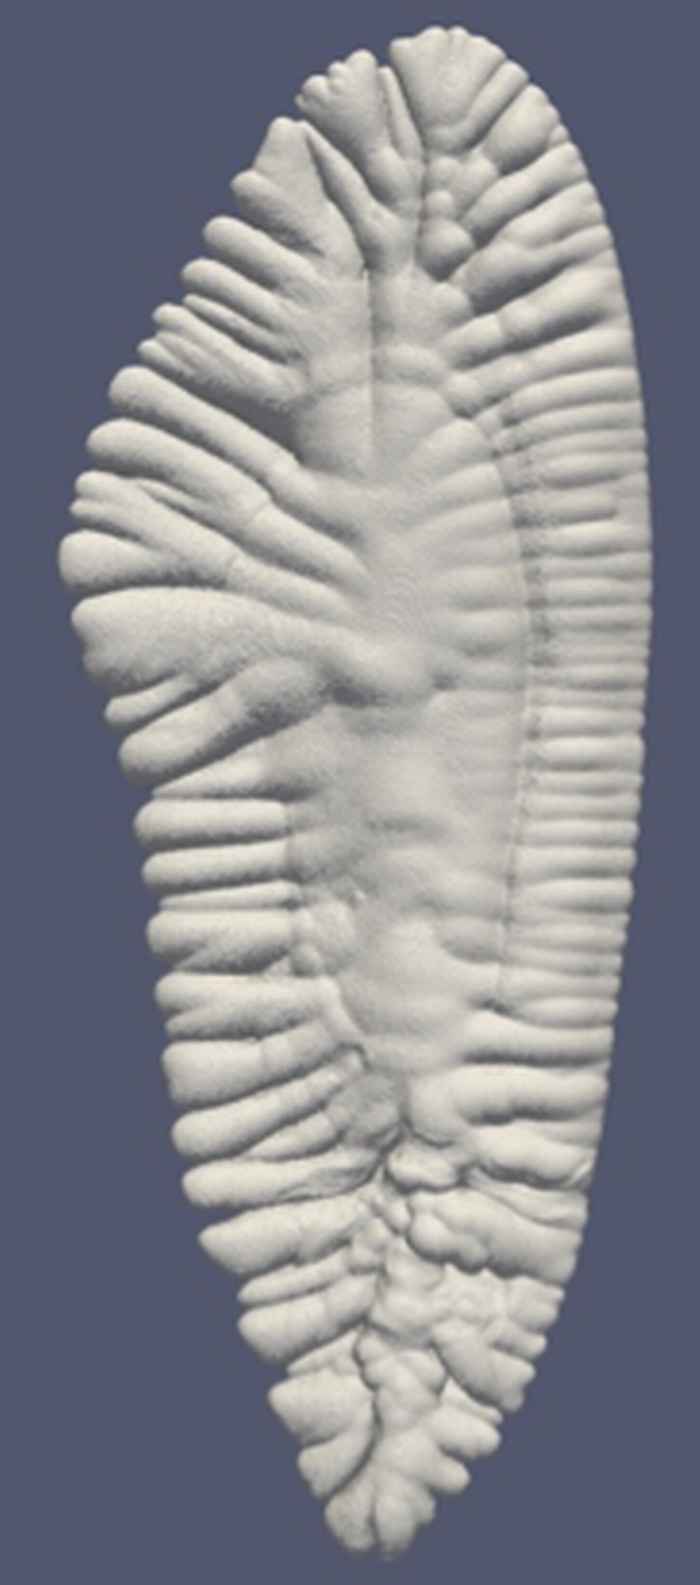 Surface reconstruction of a microCT of an otolith of the European hake (Merlucius merlucius)